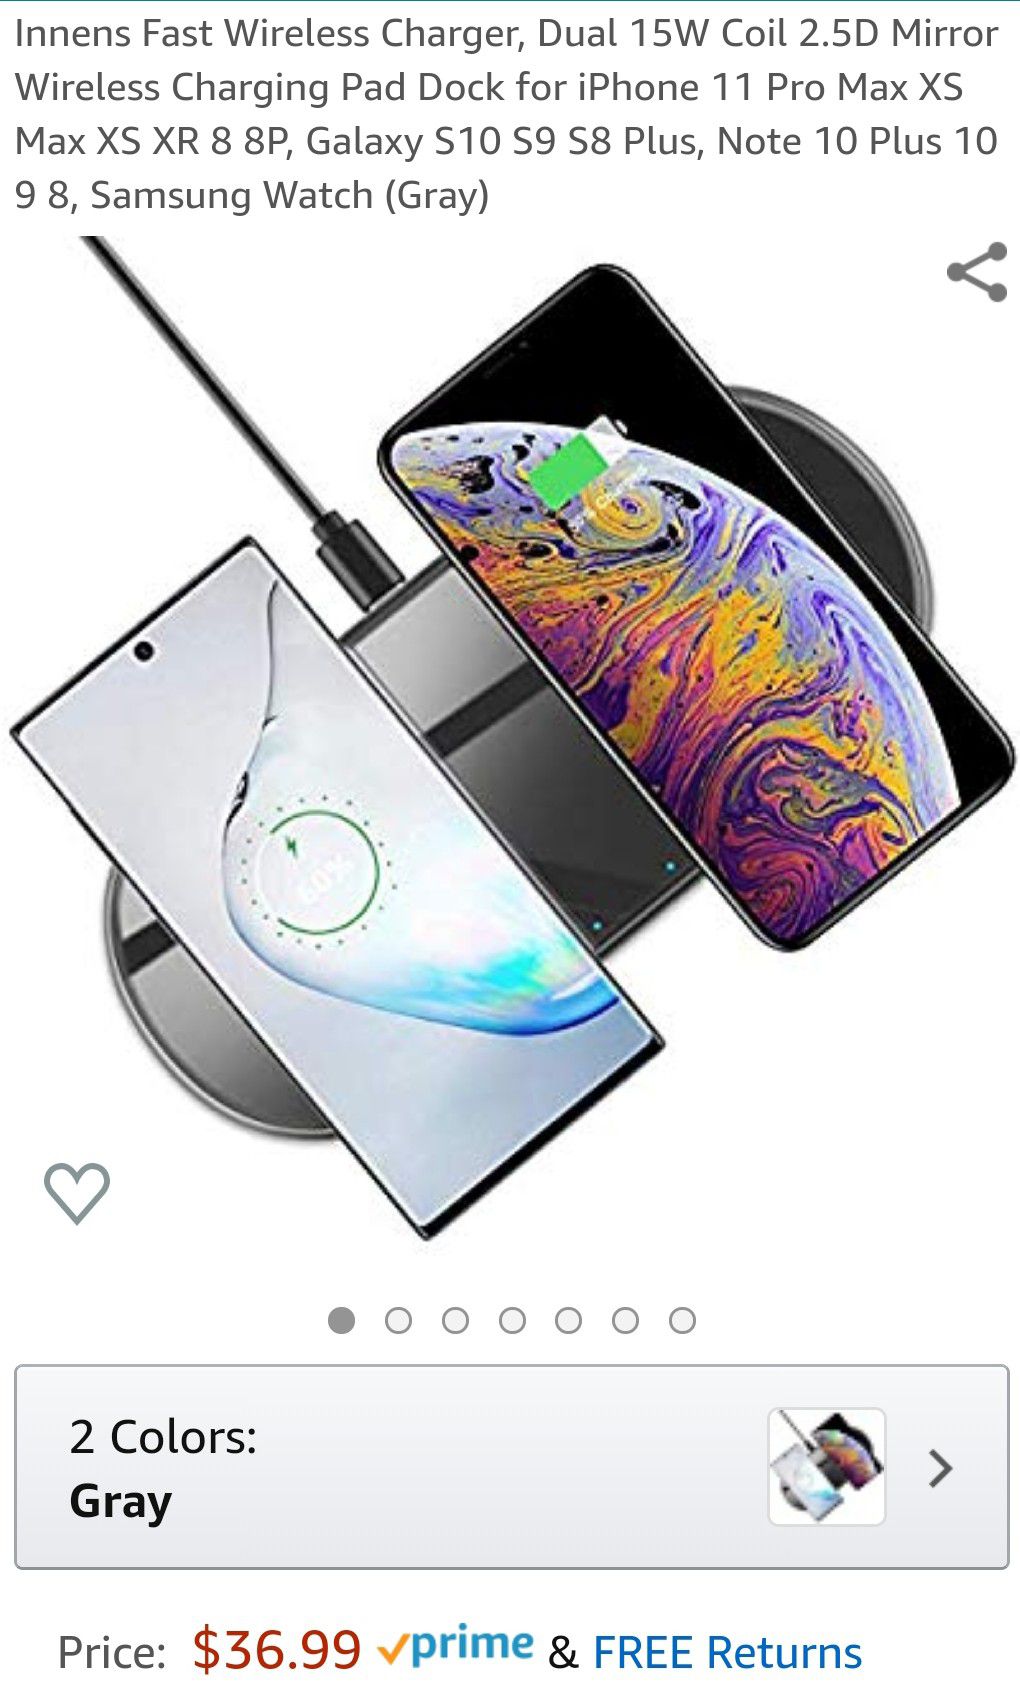 Innens Fast Wireless Charger